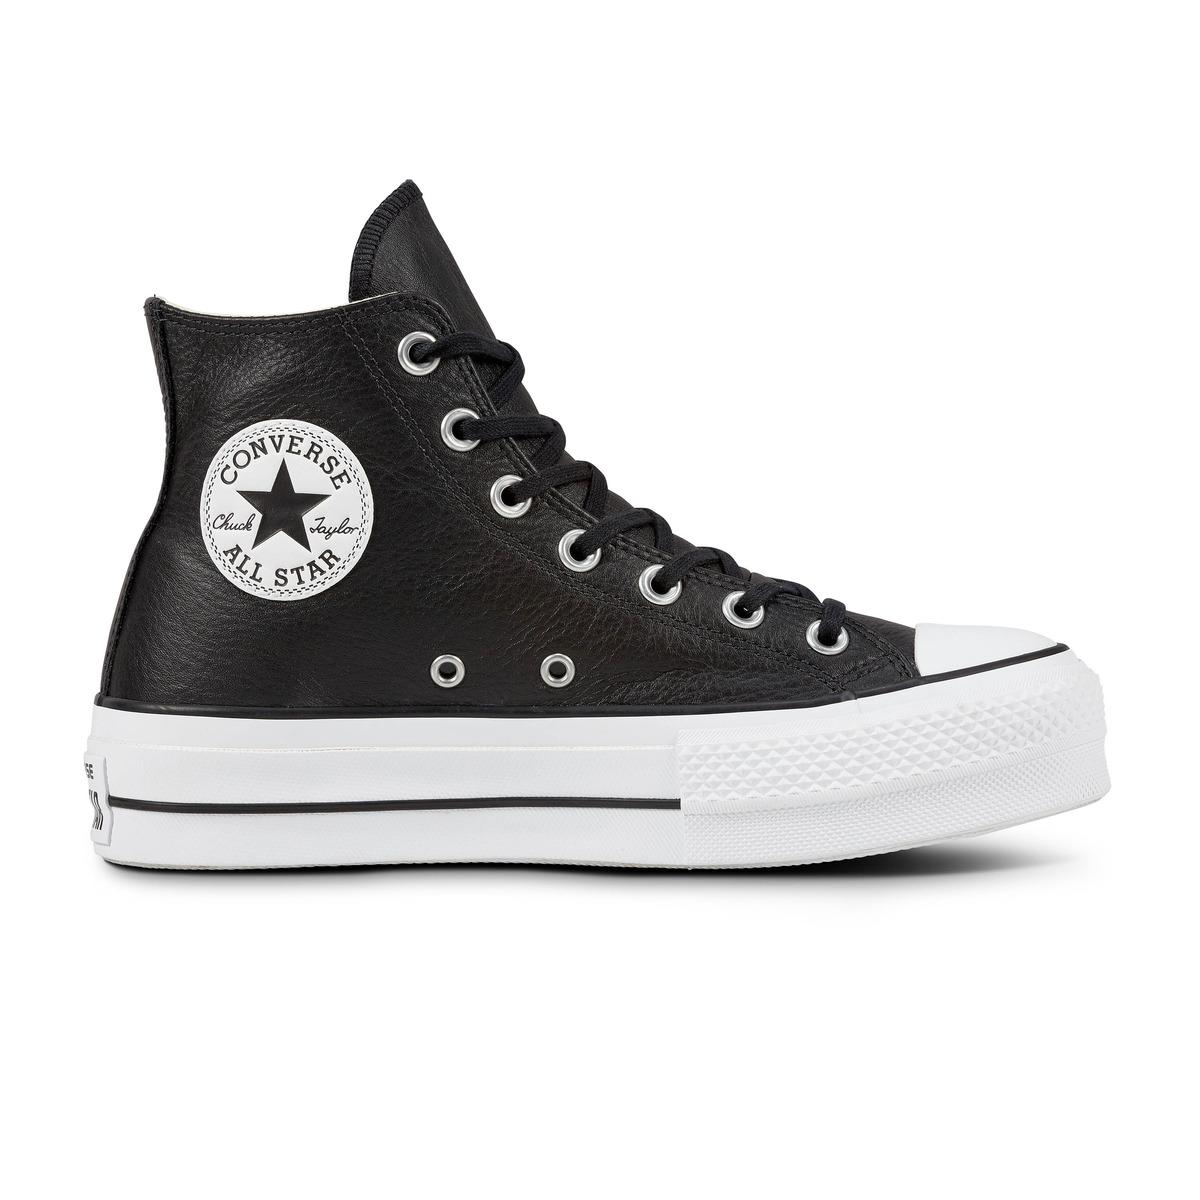 Converse Chuck Taylor All Star Lift Clean Platform High Leather Casual Trainers in Black - Lyst